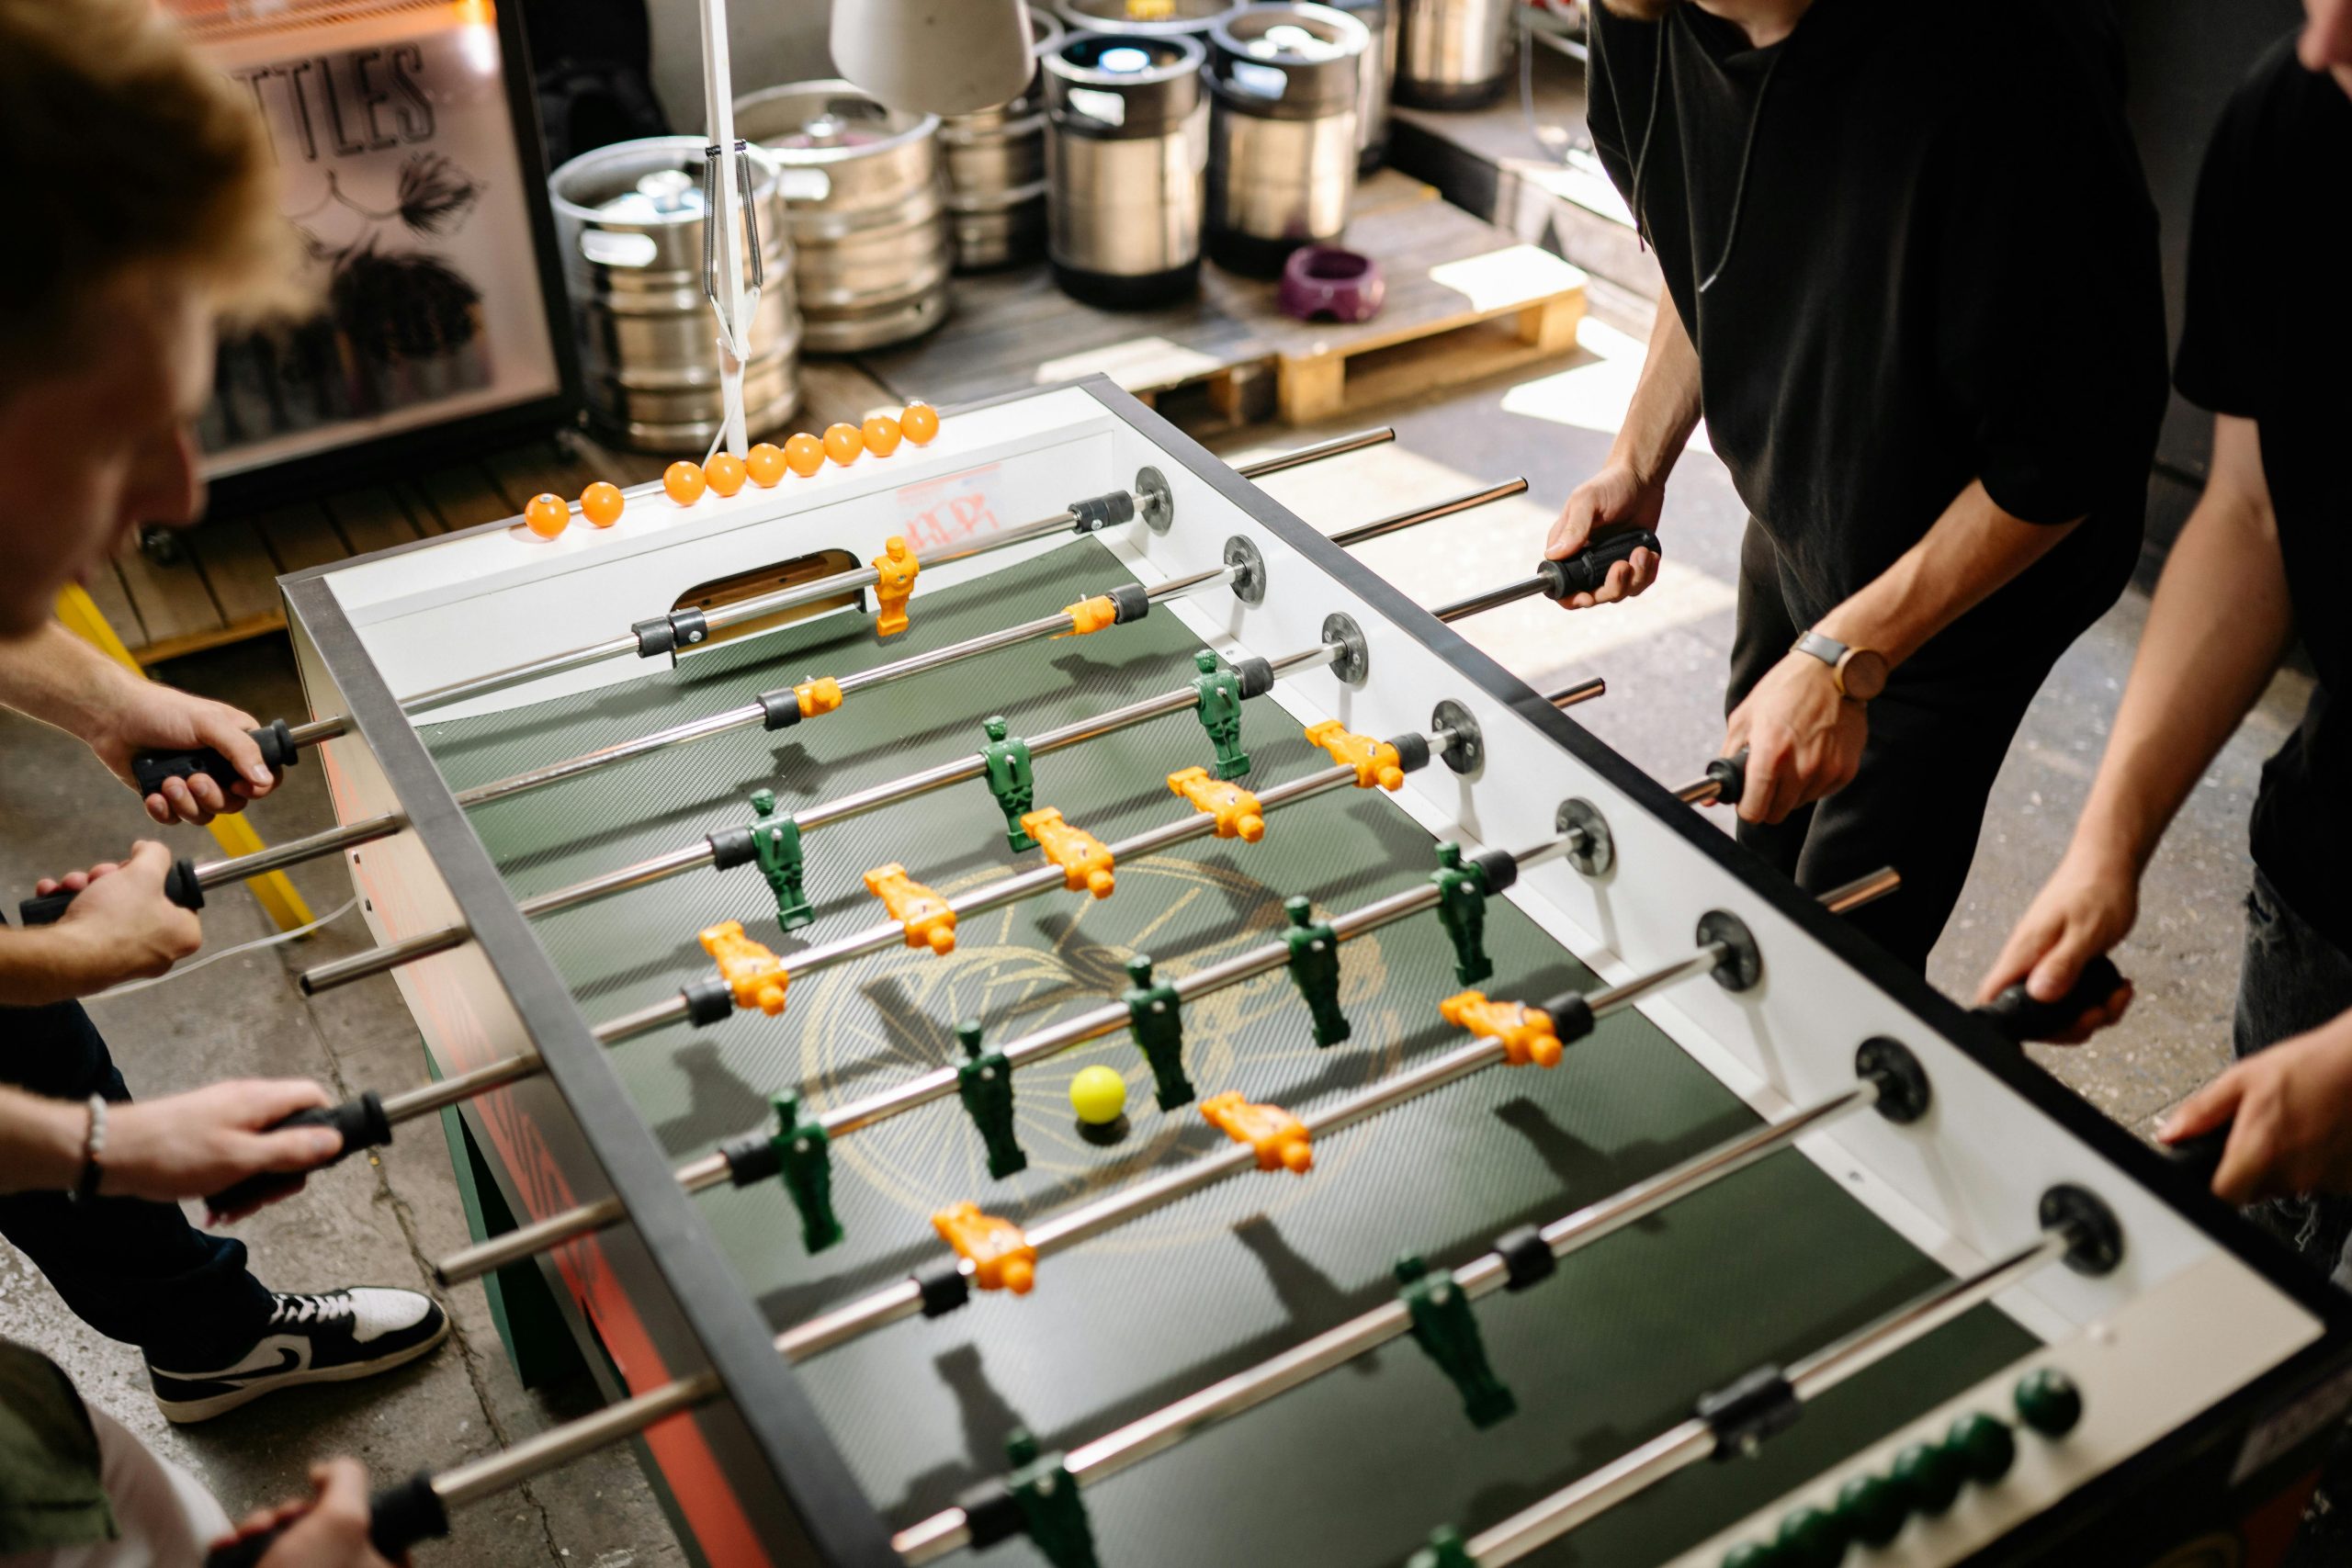 An aerial view of three people engaging in a competitive game of foosball on a standard table, with a bright yellow ball in play.